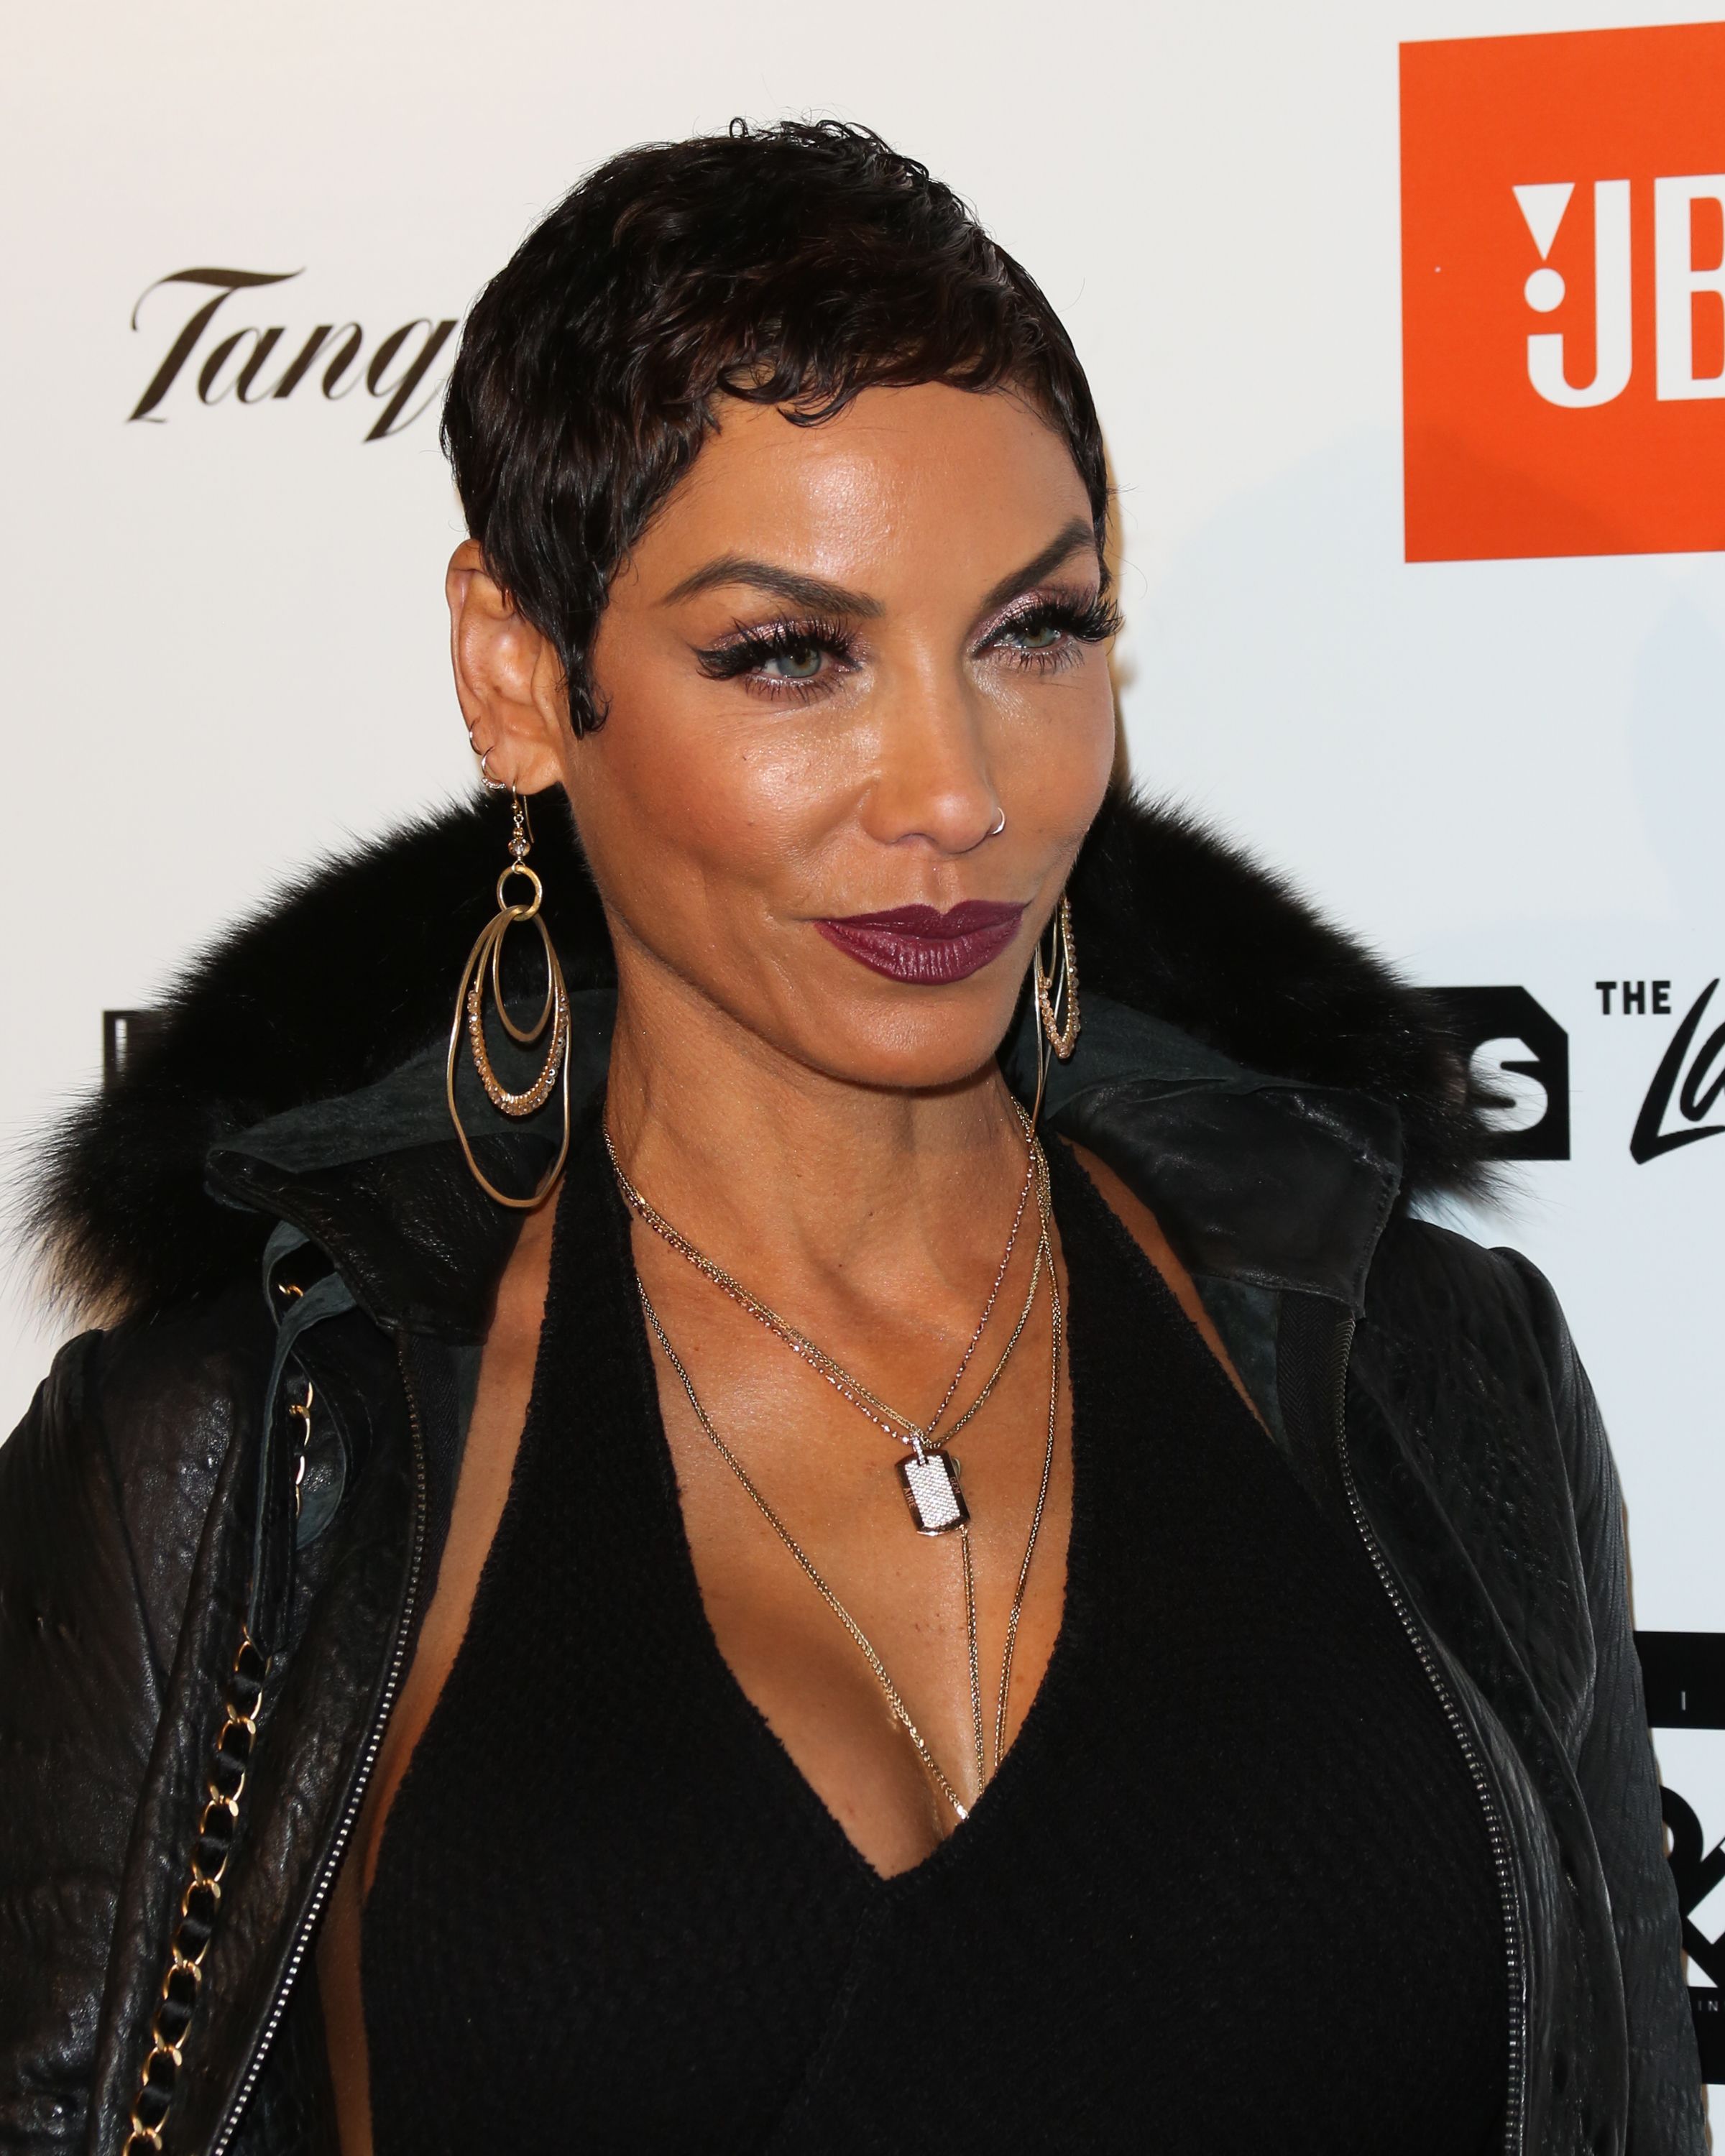 Nicole Murphy during Kenny 'The Jet' Smith's annual All-Star bash on February 16, 2018 in California. | Source: Getty Images